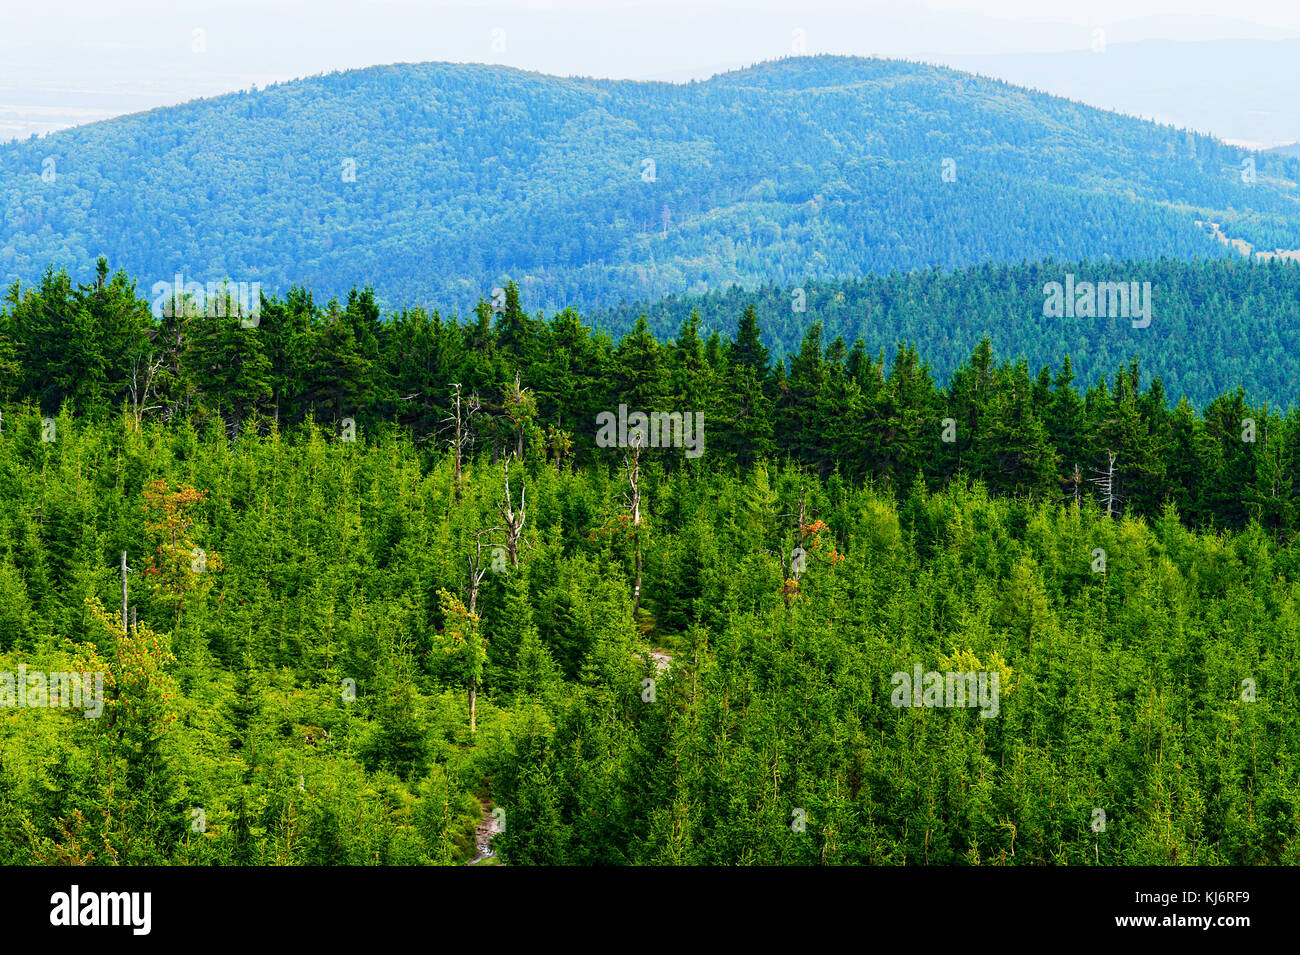 Kalenica (Turnberg) mountain summit in the Owl Mountains Landscape Park, Sudetes, Poland. Forested hills with growing spruce trees in evergreen forest Stock Photo